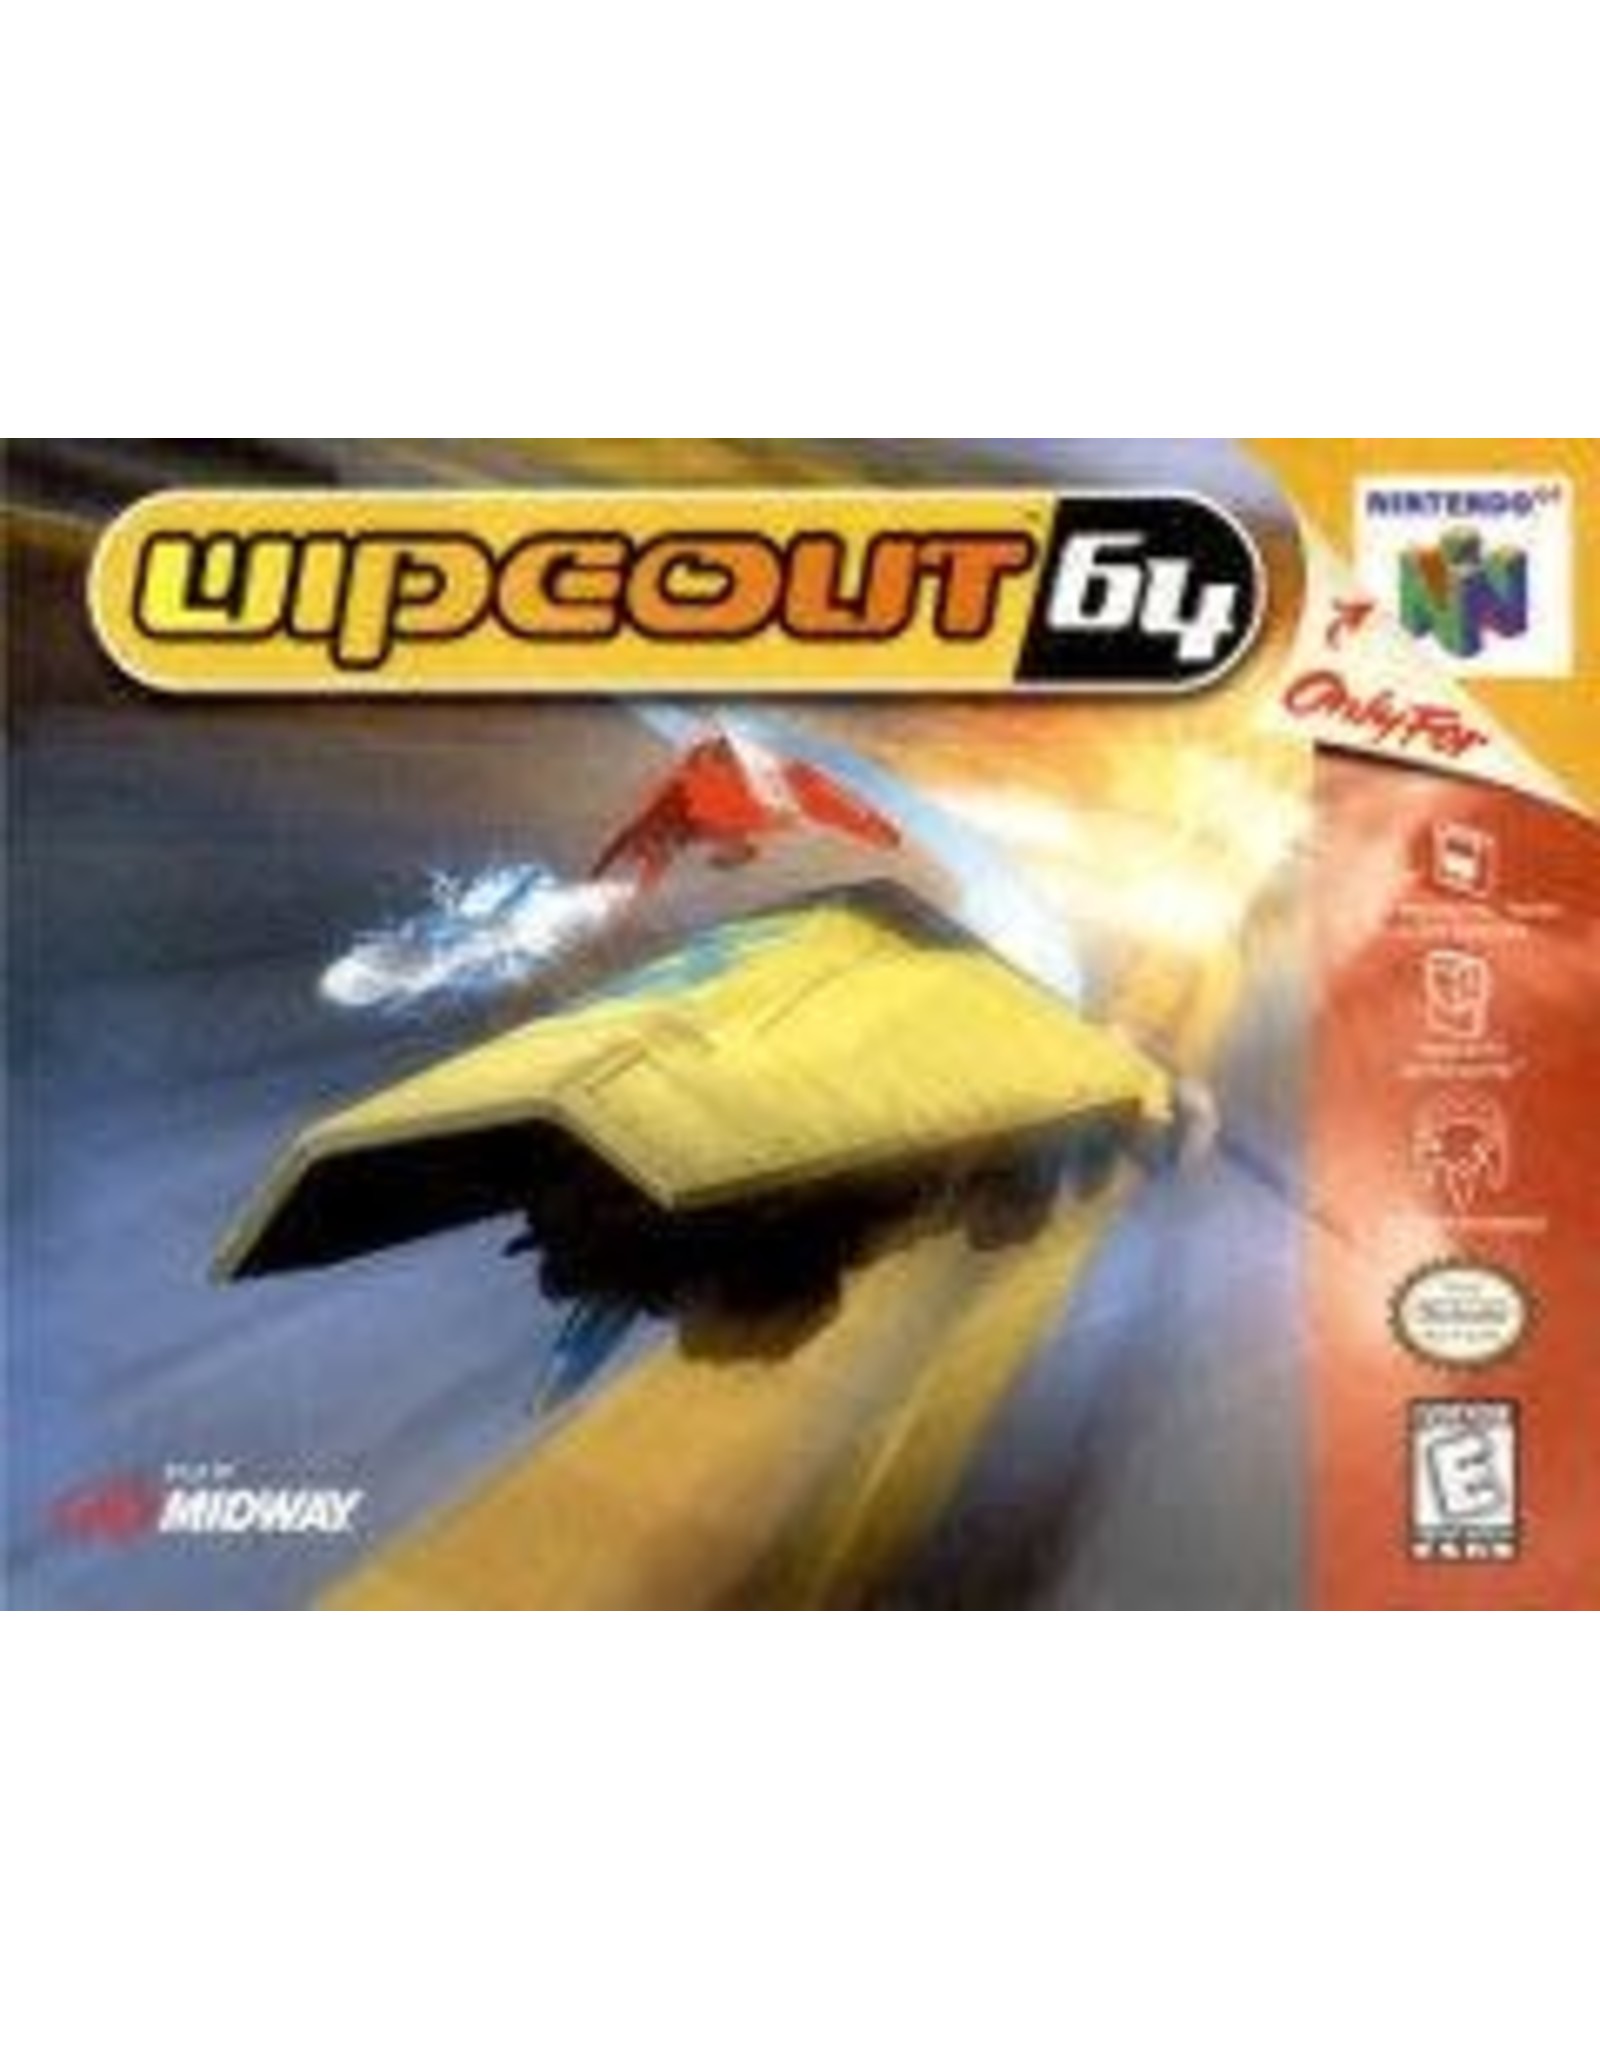 Nintendo 64 Wipeout 64 (Cart Only, Damaged Label)